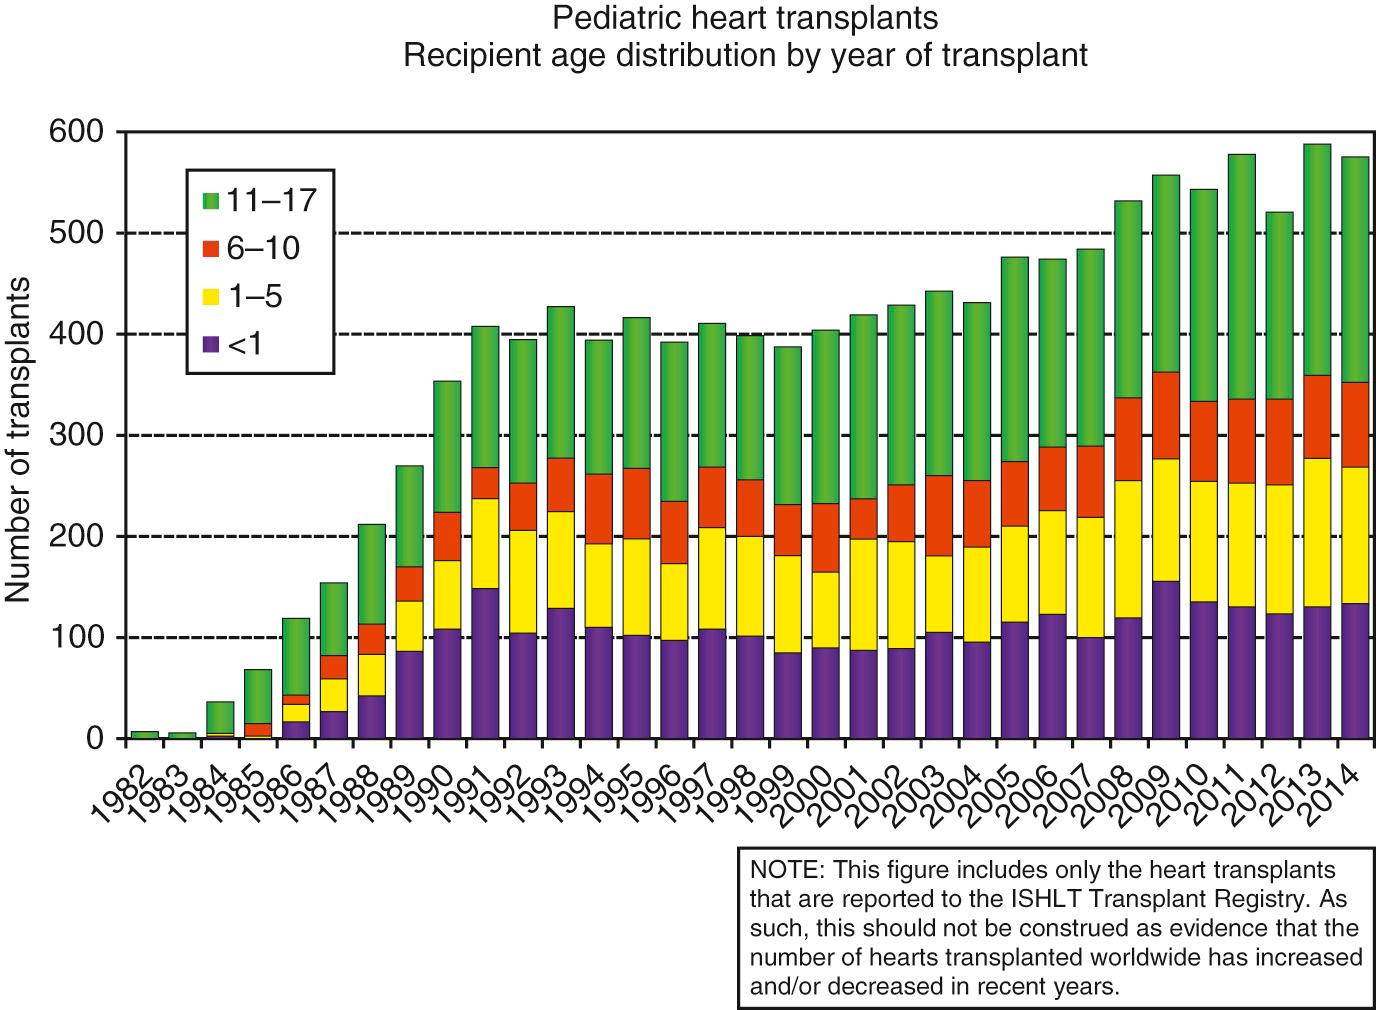 Fig. 67.1, Total number of recipients of heart transplantation during childhood by year of transplant and age. ISHLT , International Society of Heart and Lung Transplantation.